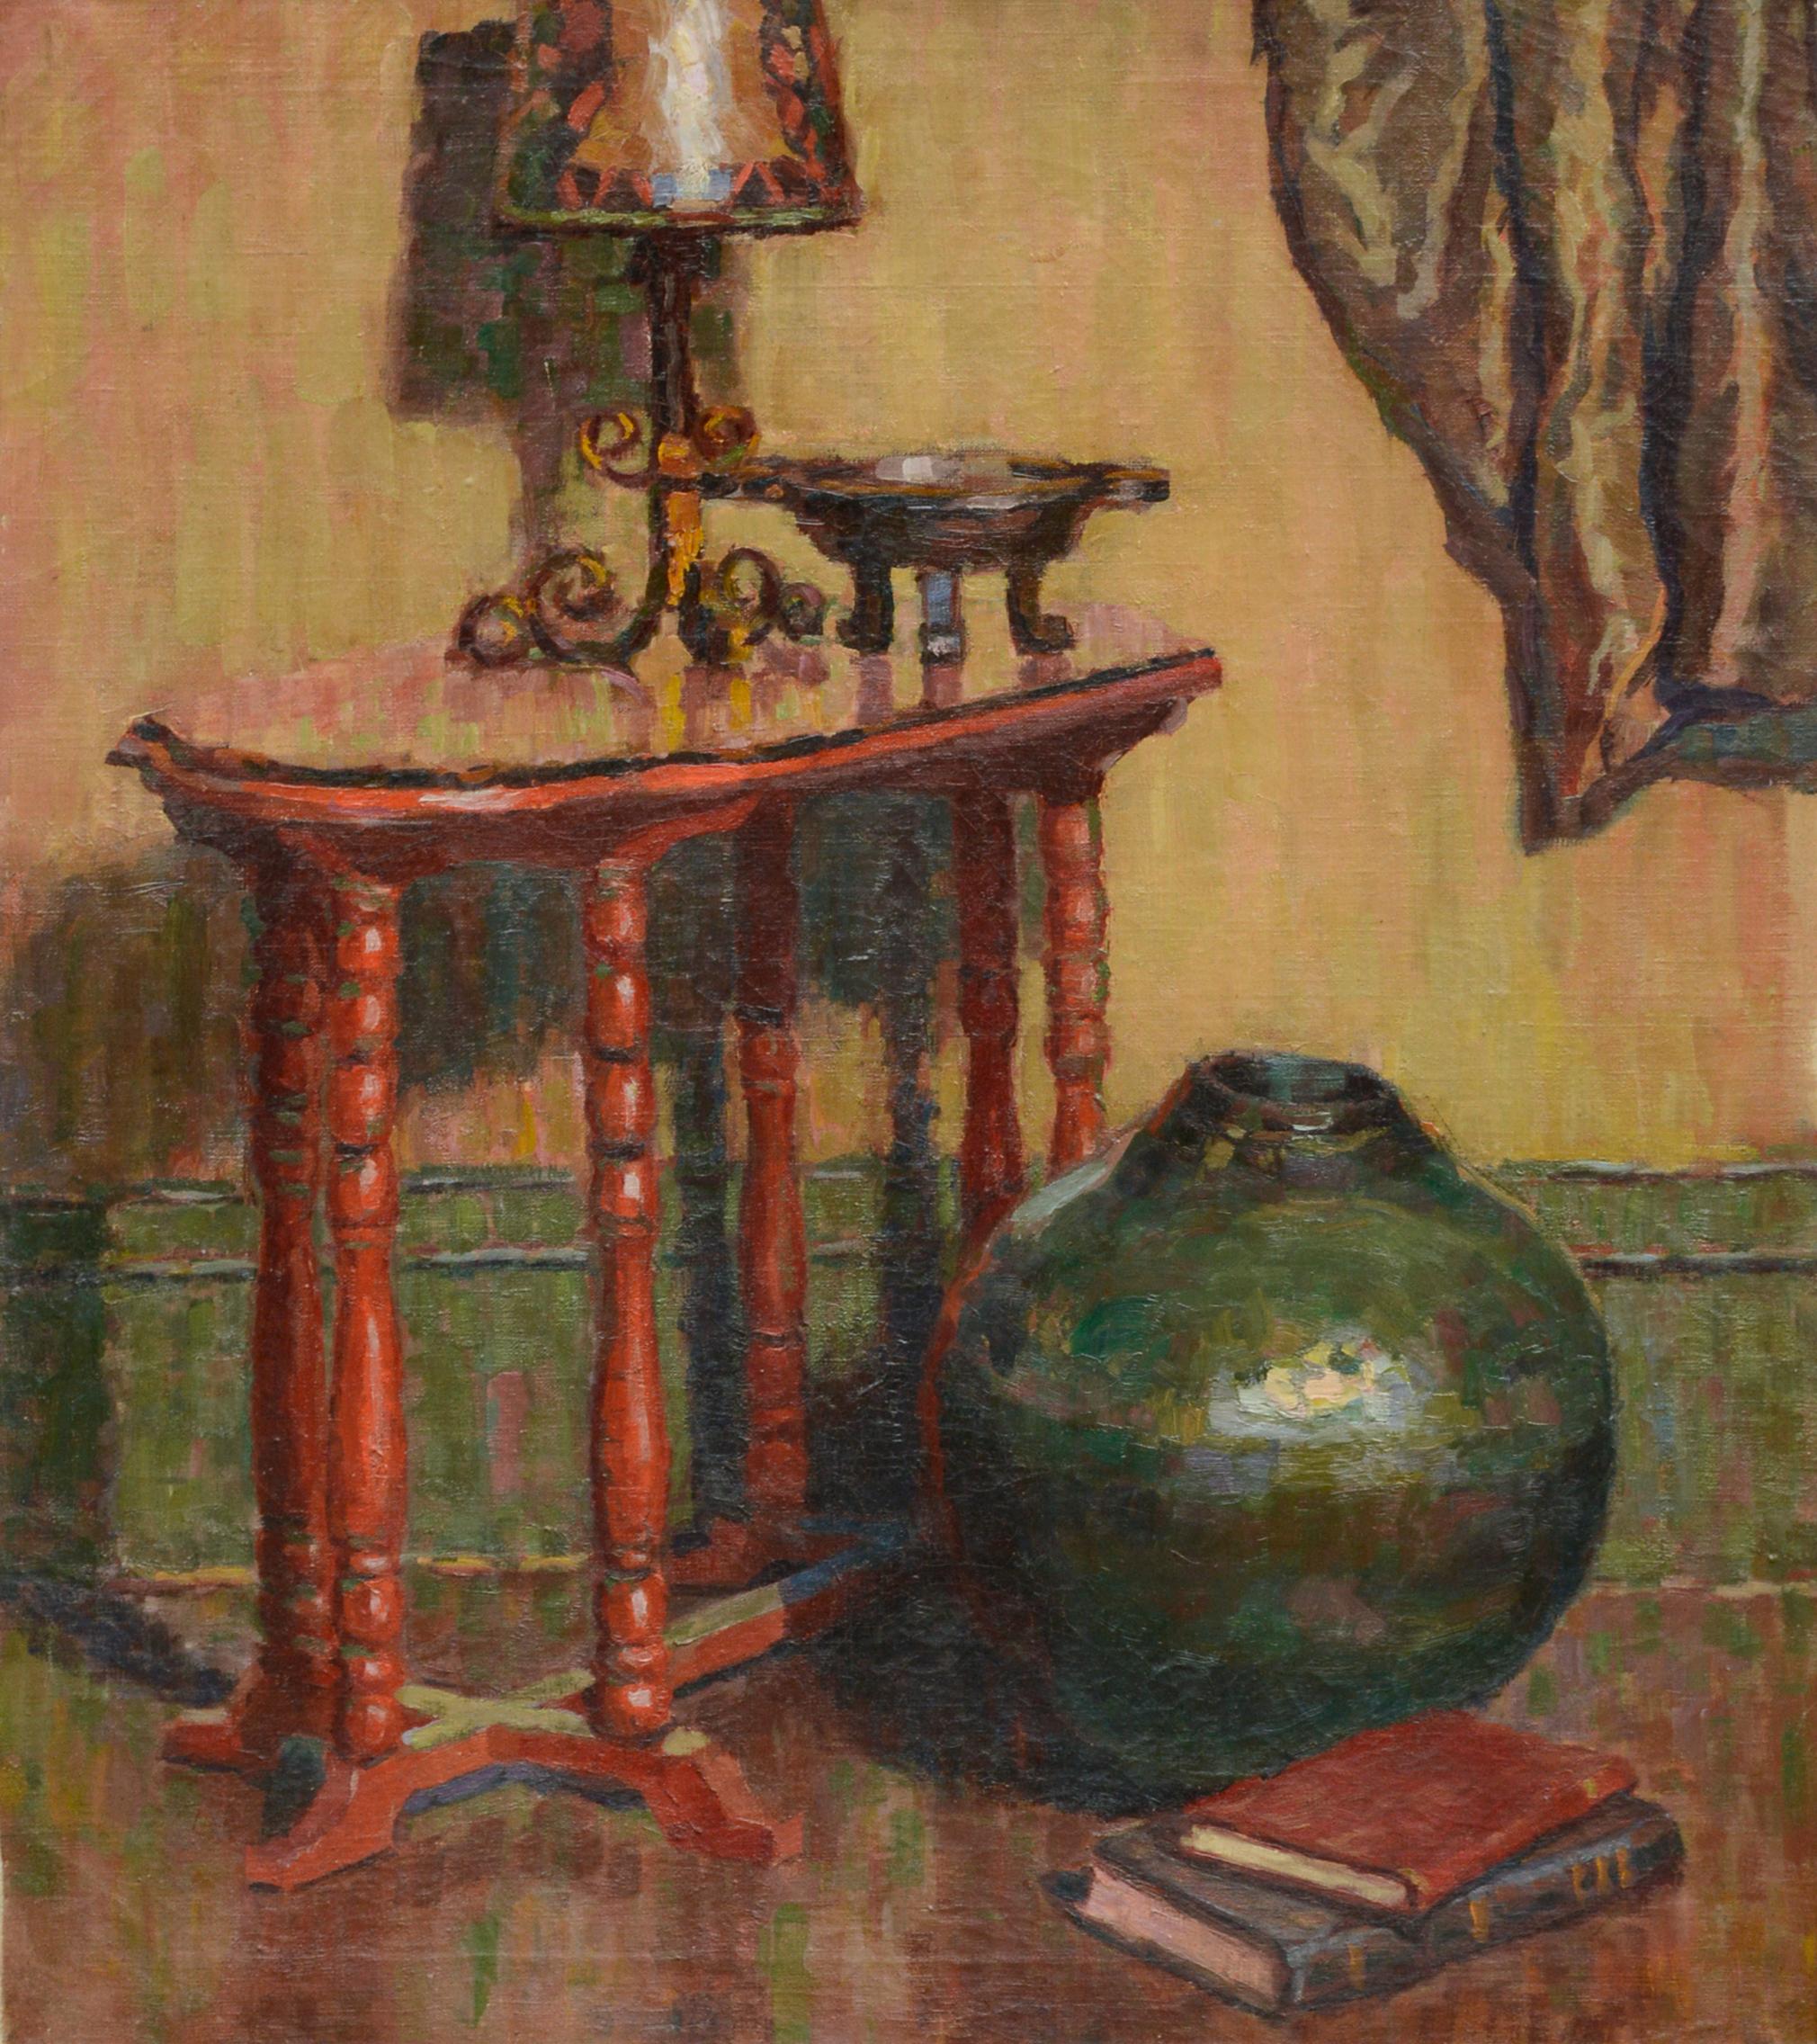 Mid-Century Interior Scene with Red Table and Green Vase - Painting by Unknown